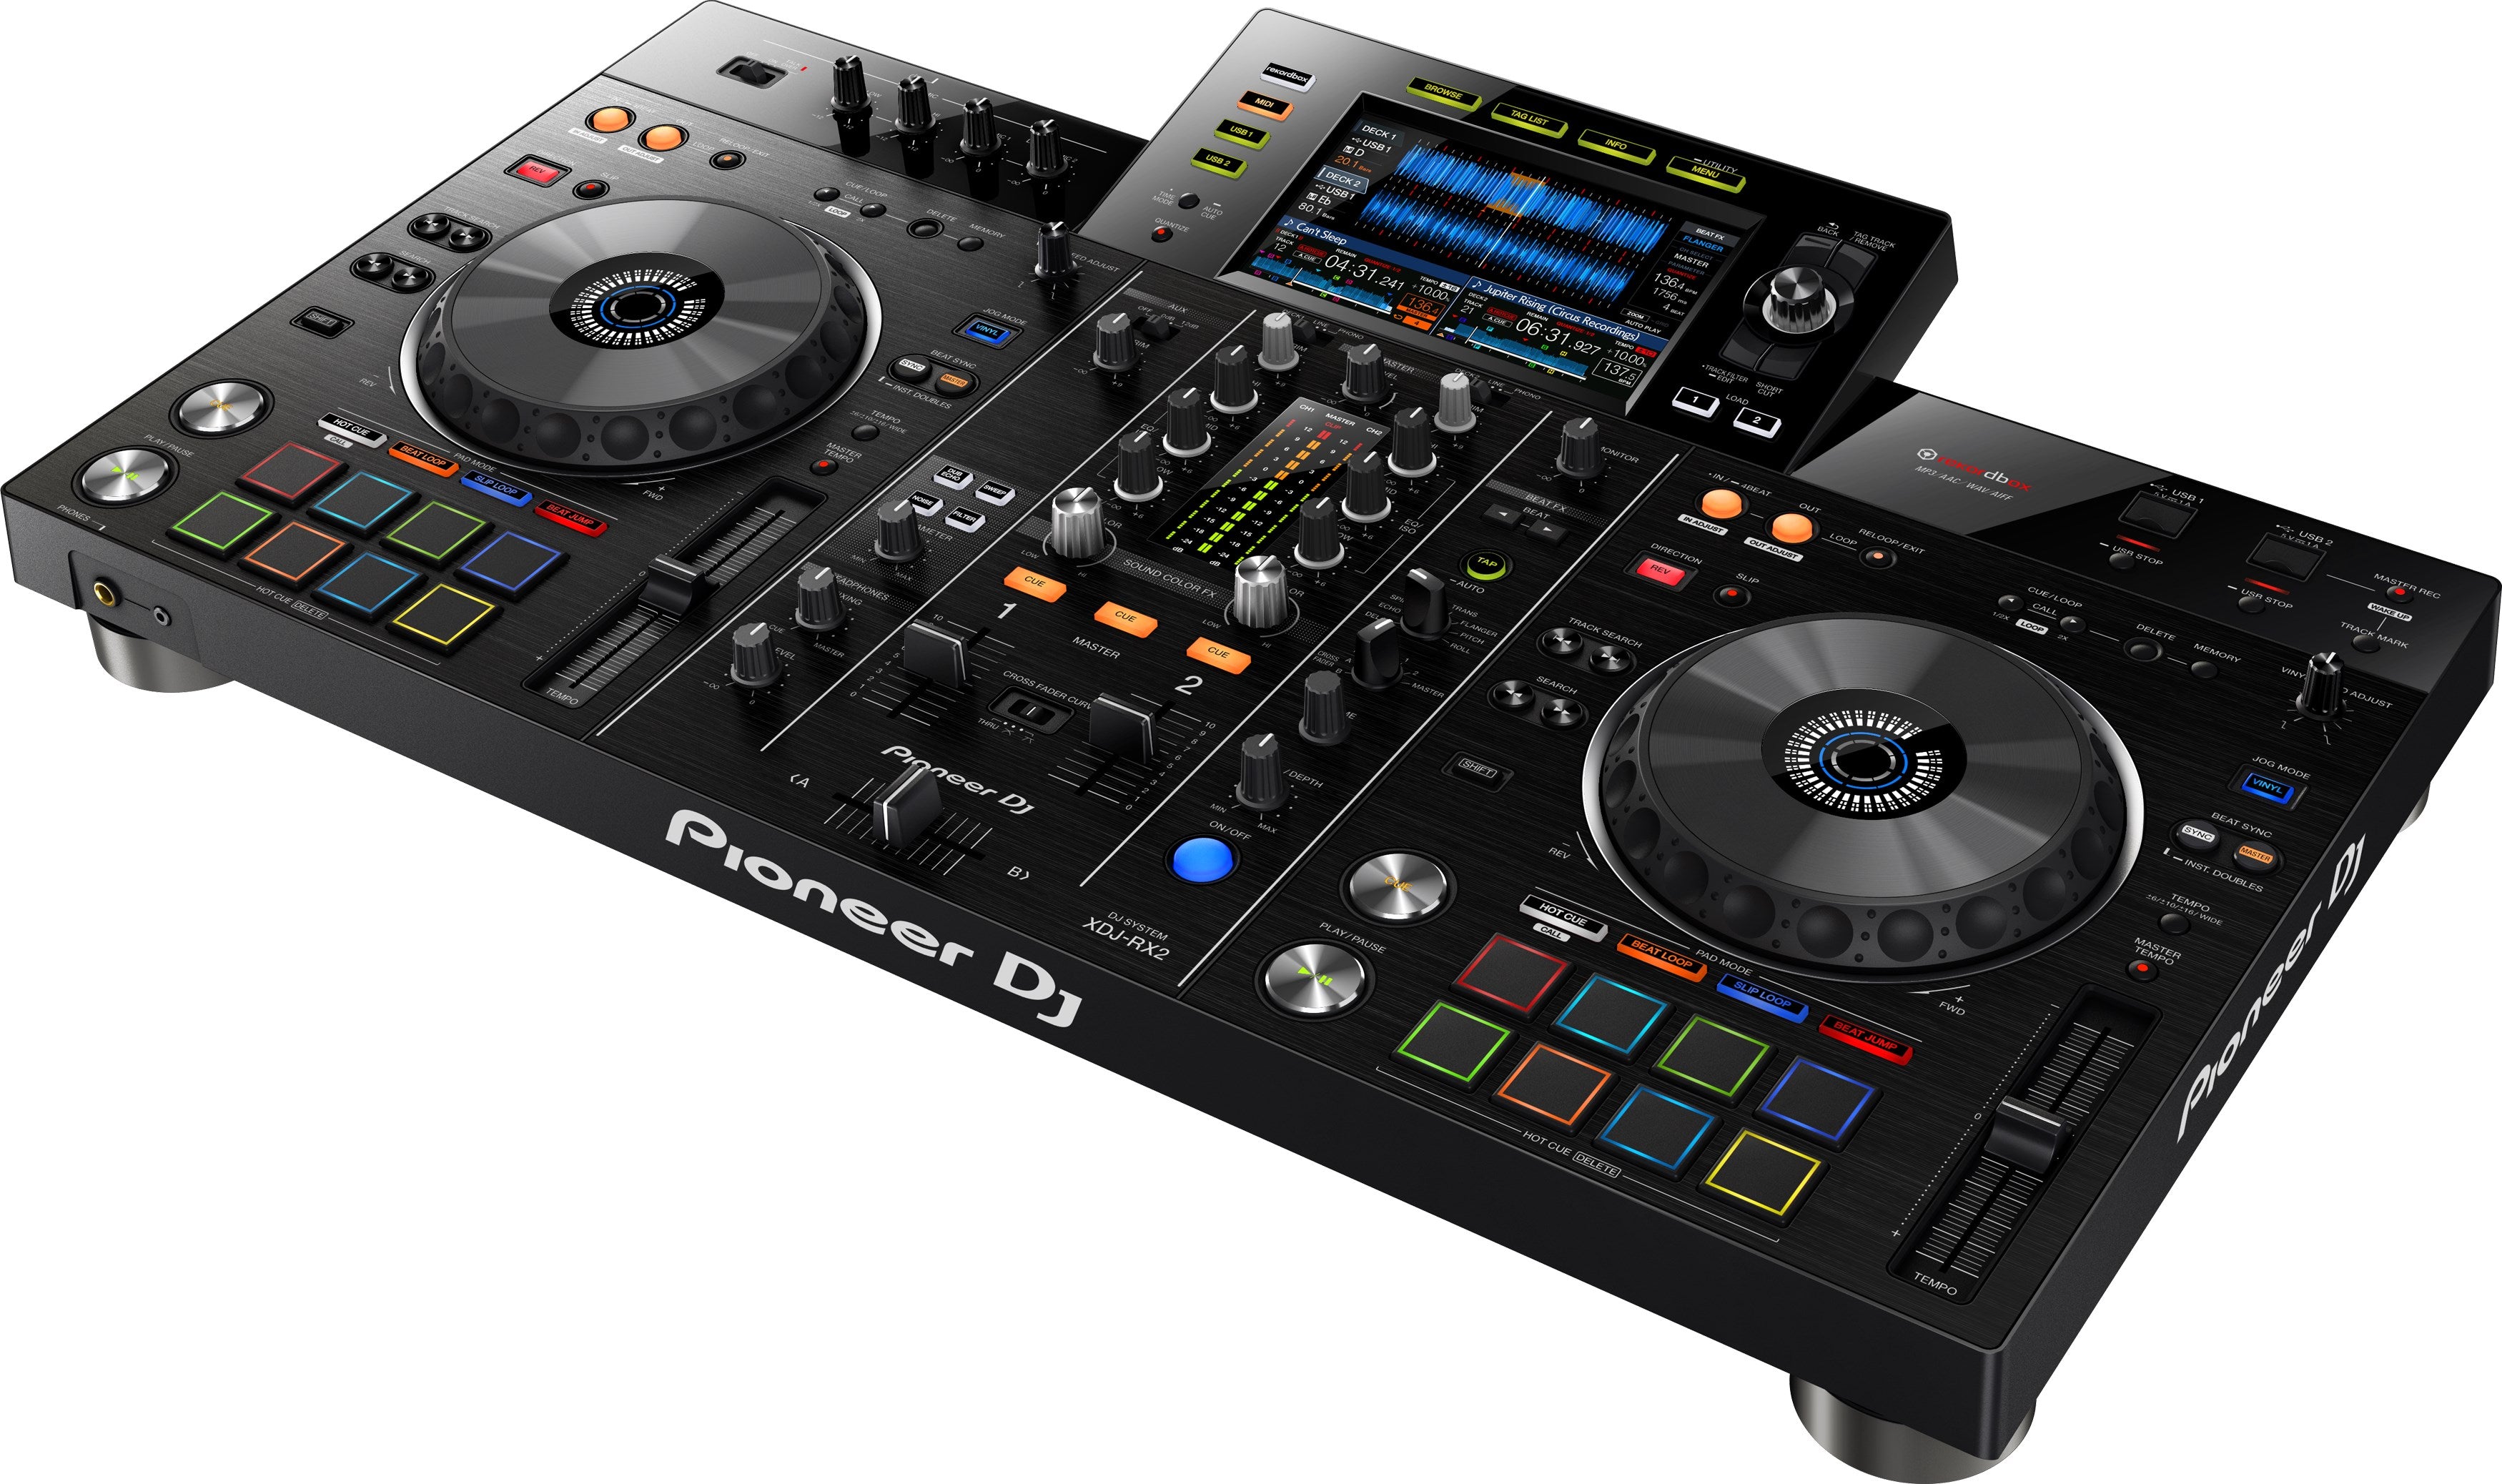 PIONEER XDJ-RX2 2 CHANNEL PERFORMANCE ALL IN ONE DJ SYSTEM (BLACK), PIONEER, DJ GEAR, pioneer-dj-gear-xdj-rx2, ZOSO MUSIC SDN BHD